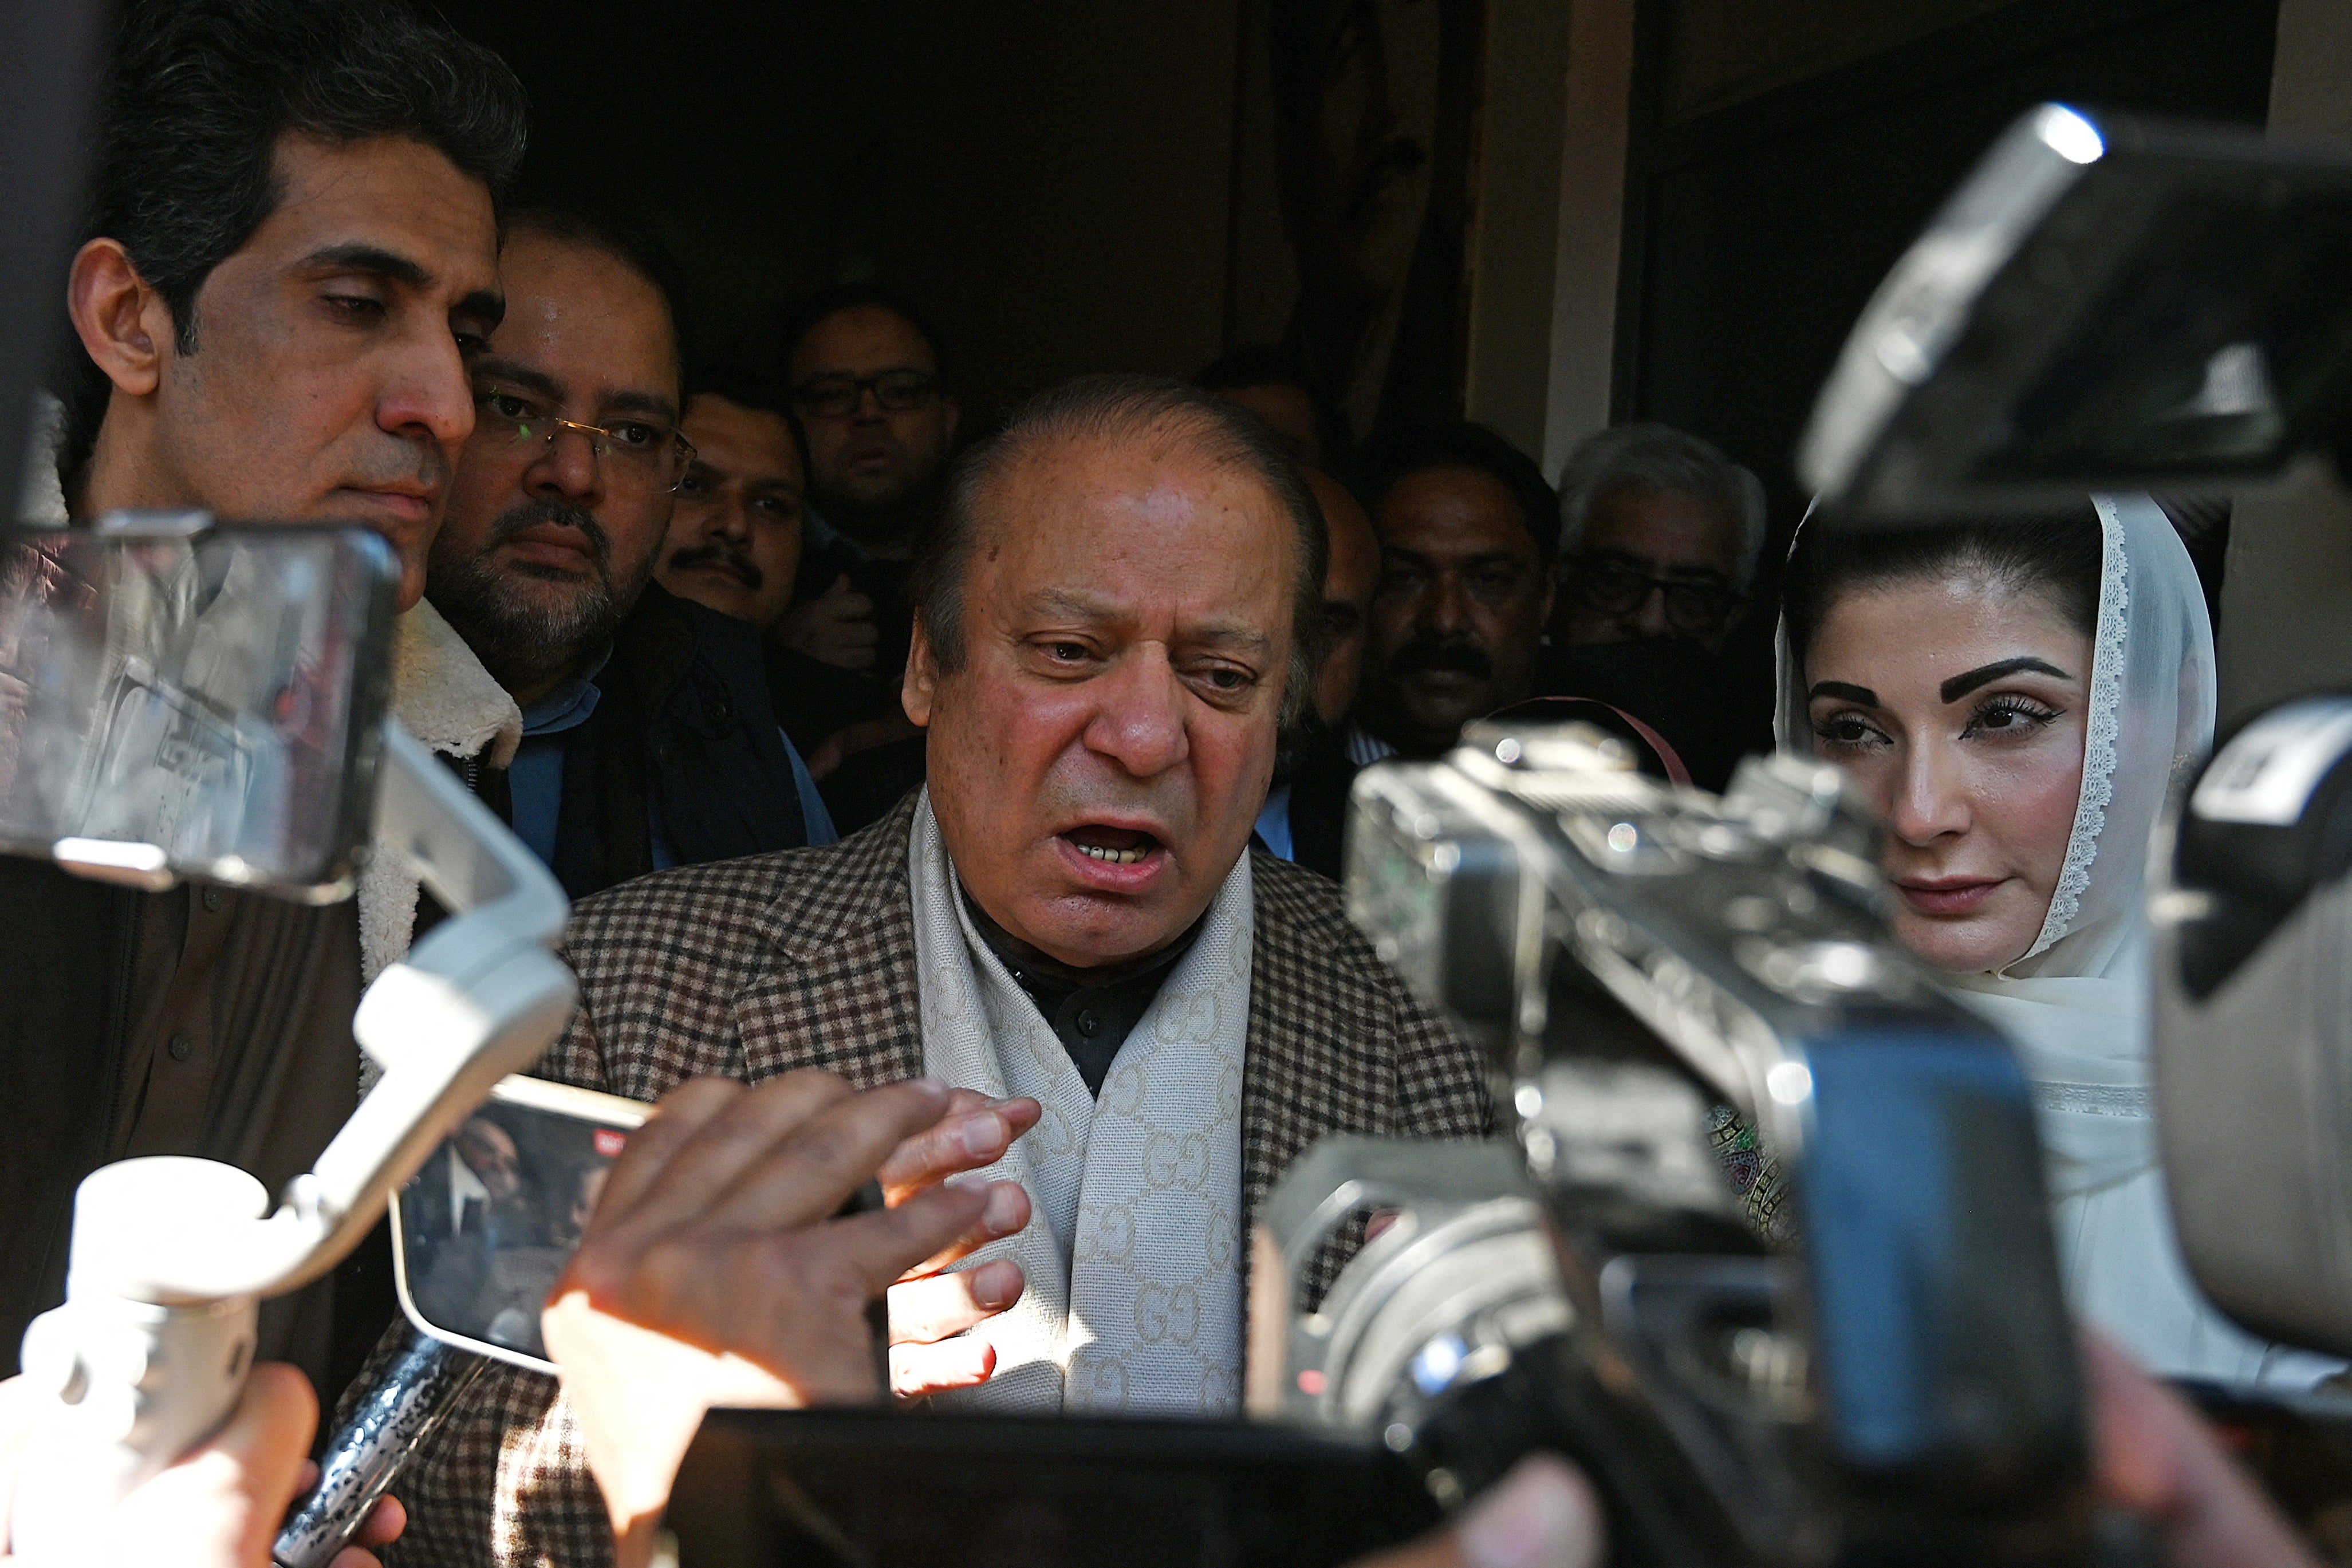 Pakistan's former Prime Minister and leader of the Pakistan Muslim League-Nawaz (PML-N) Nawaz Sharif (C) along with his daughter Maryam Nawaz (R) speaks to media after casting his ballot to vote